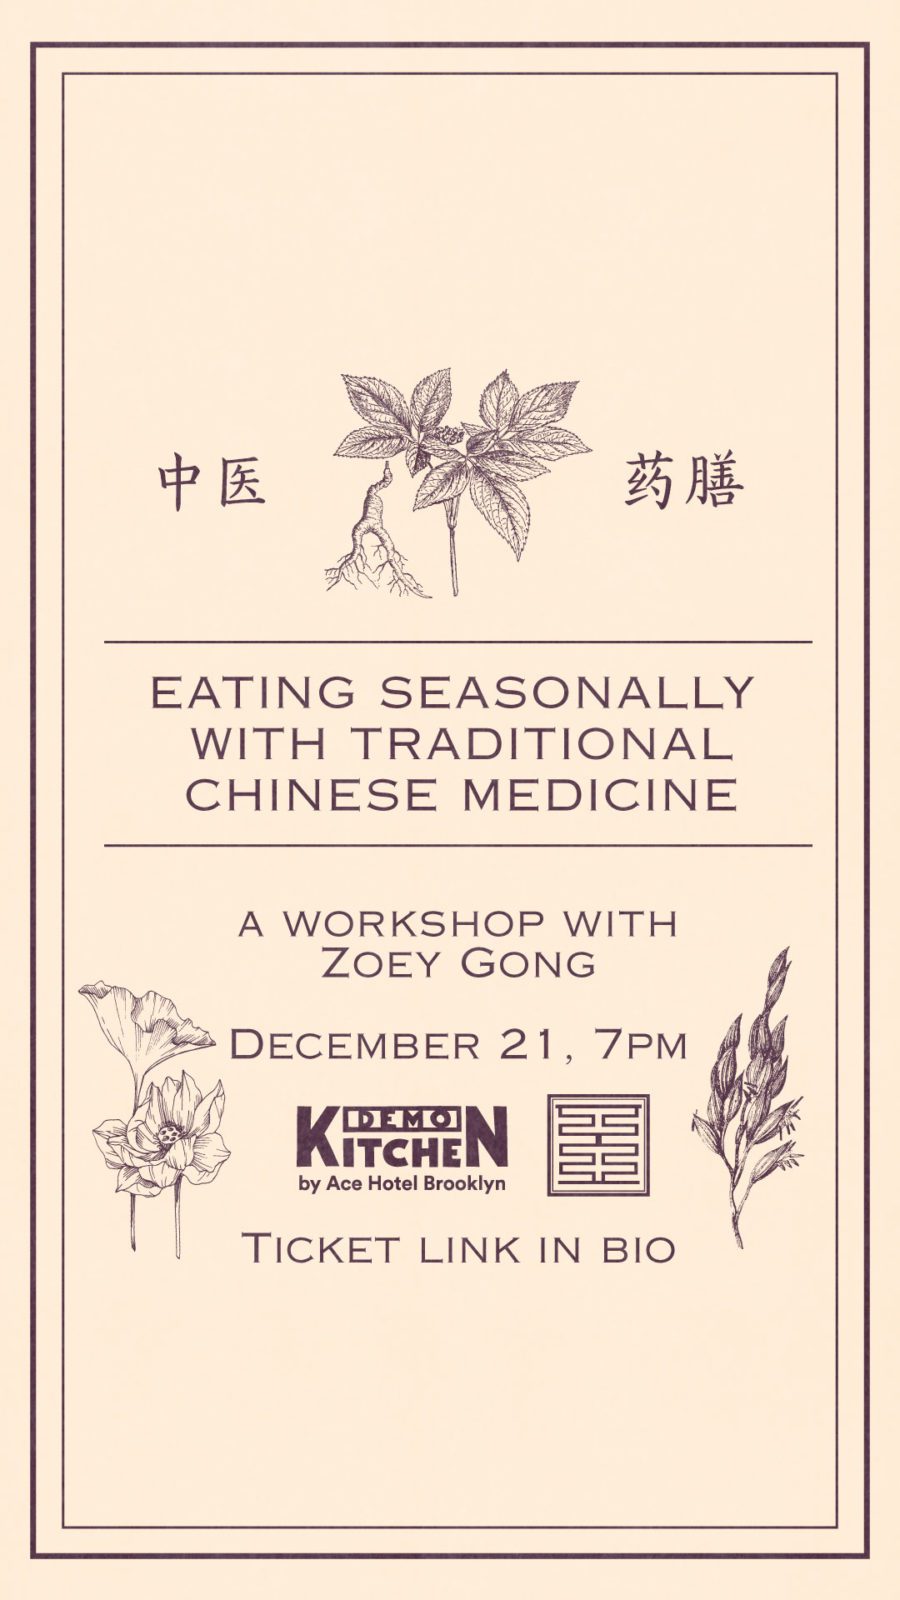 Chinese Medicine event flyer